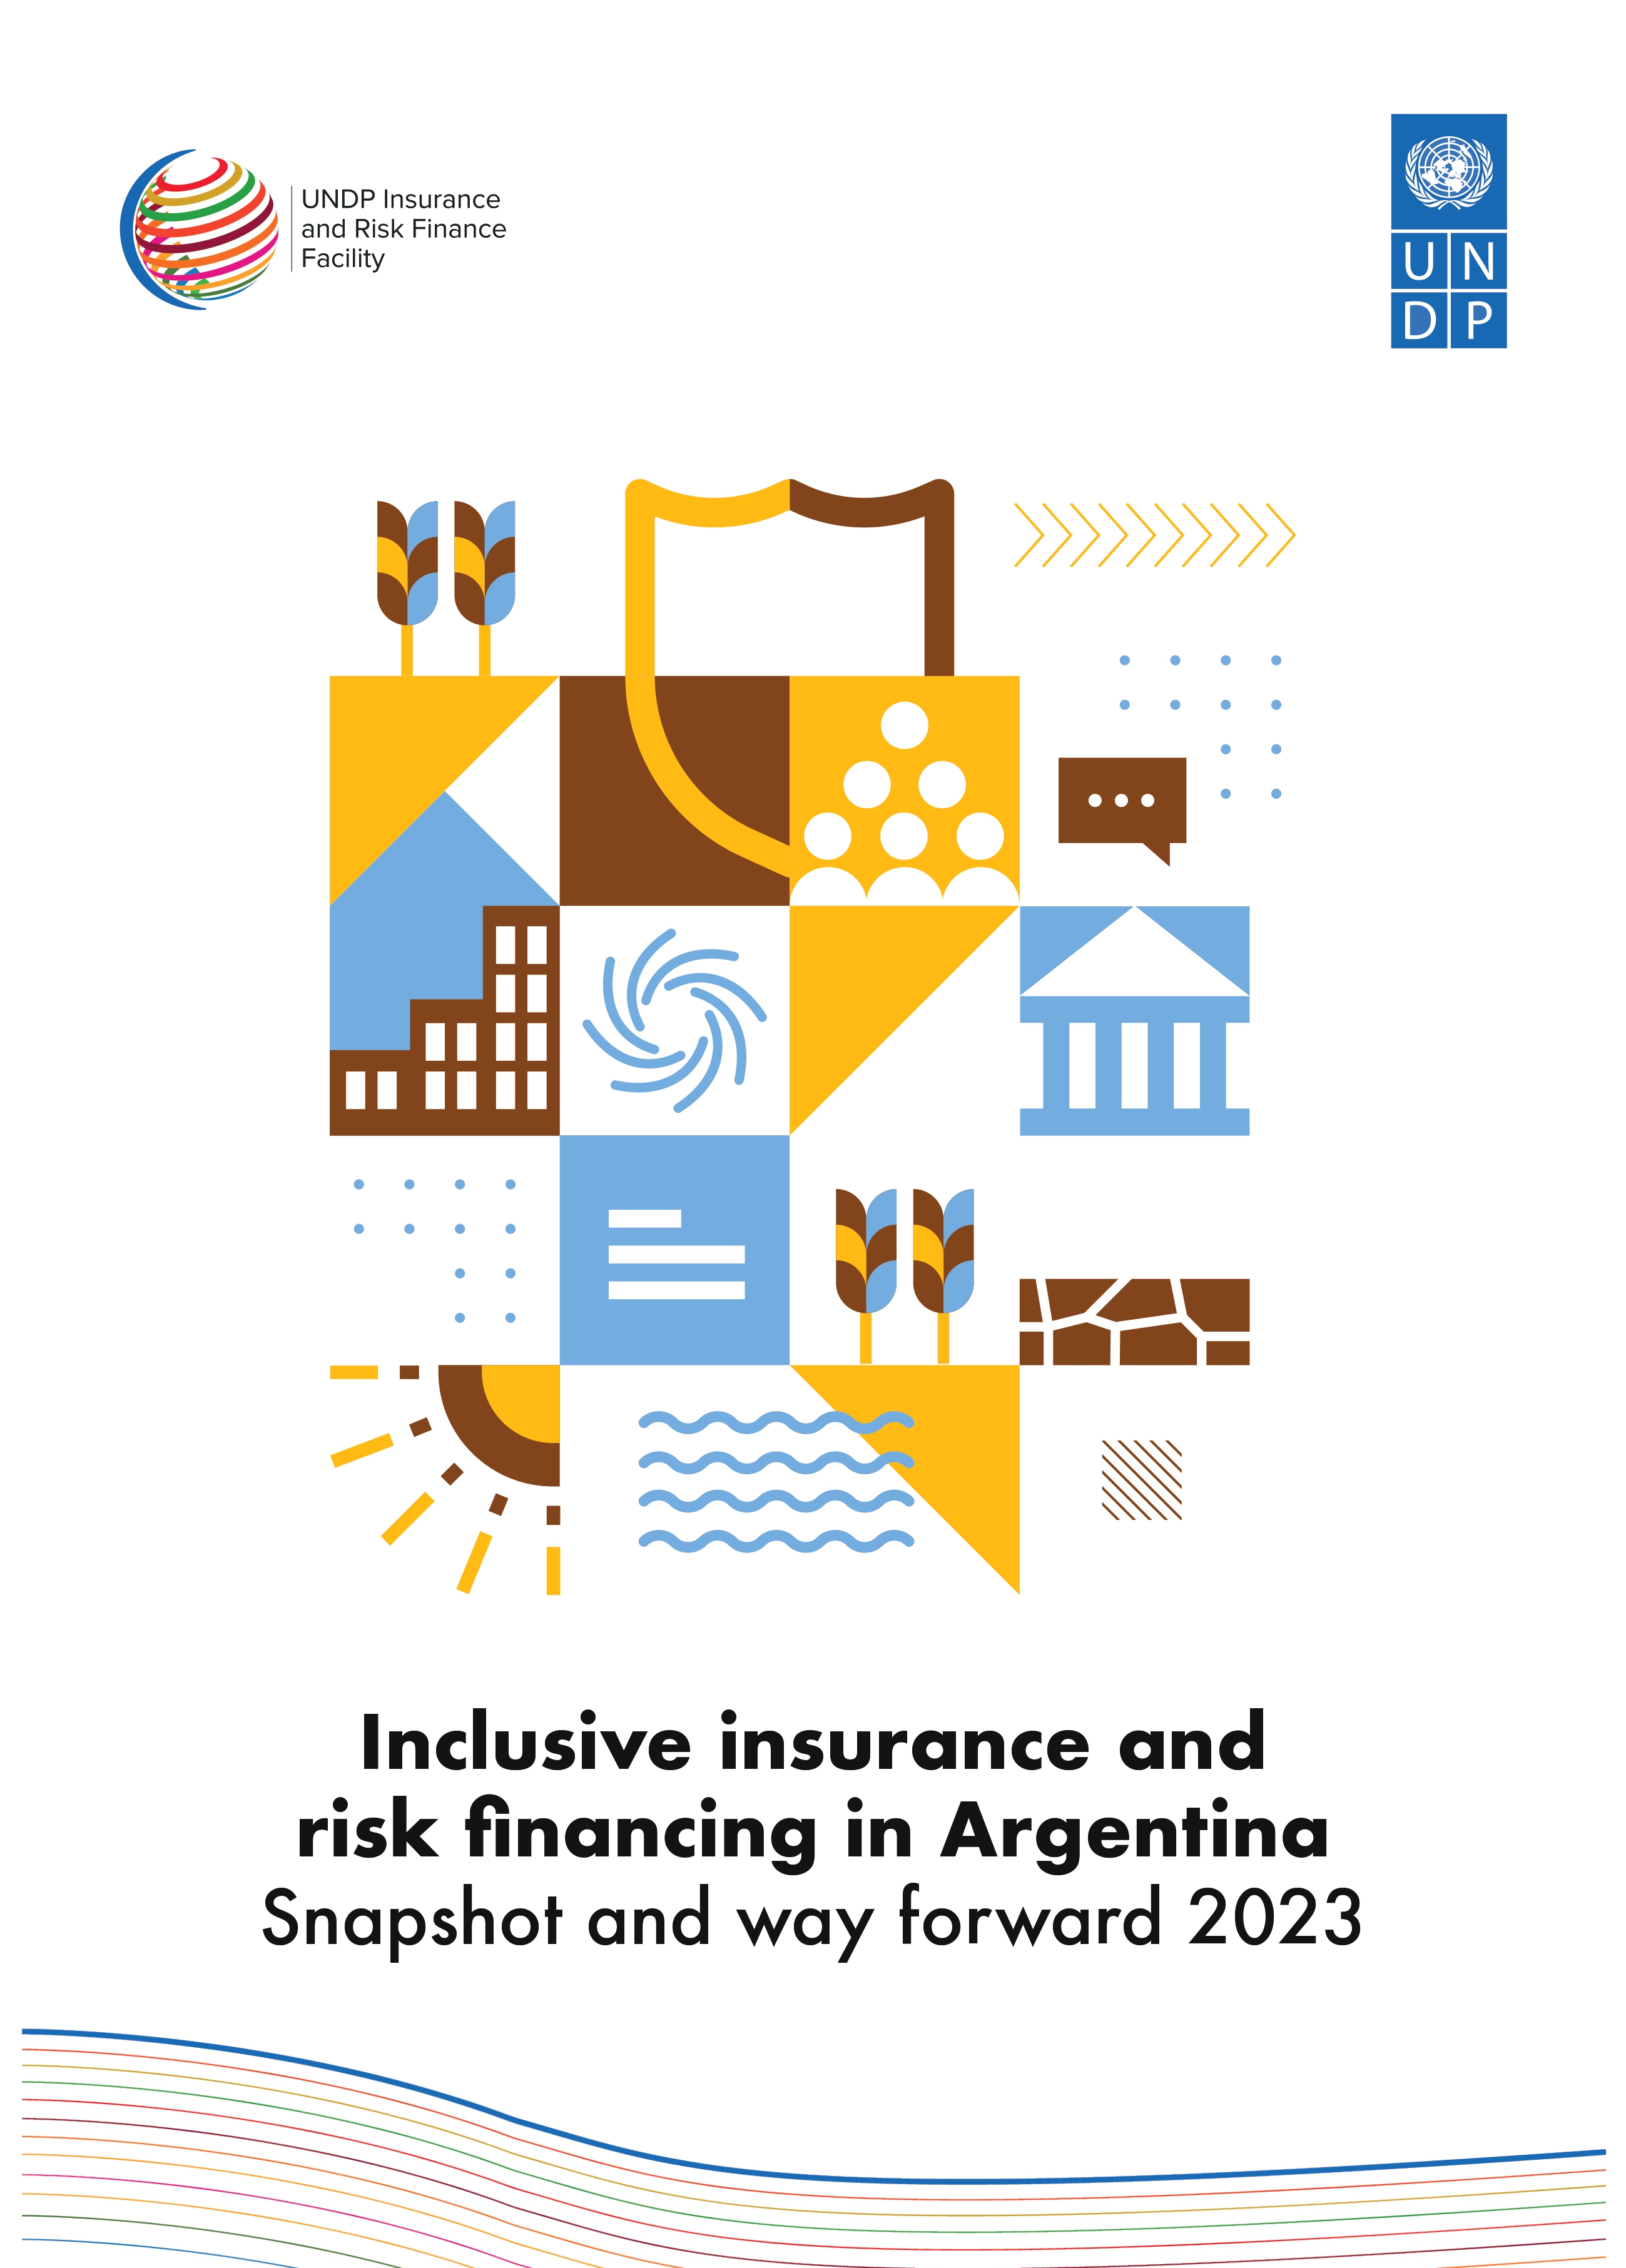 Inclusive insurance and risk financing in Argentina. Snapshot and way forward 2023